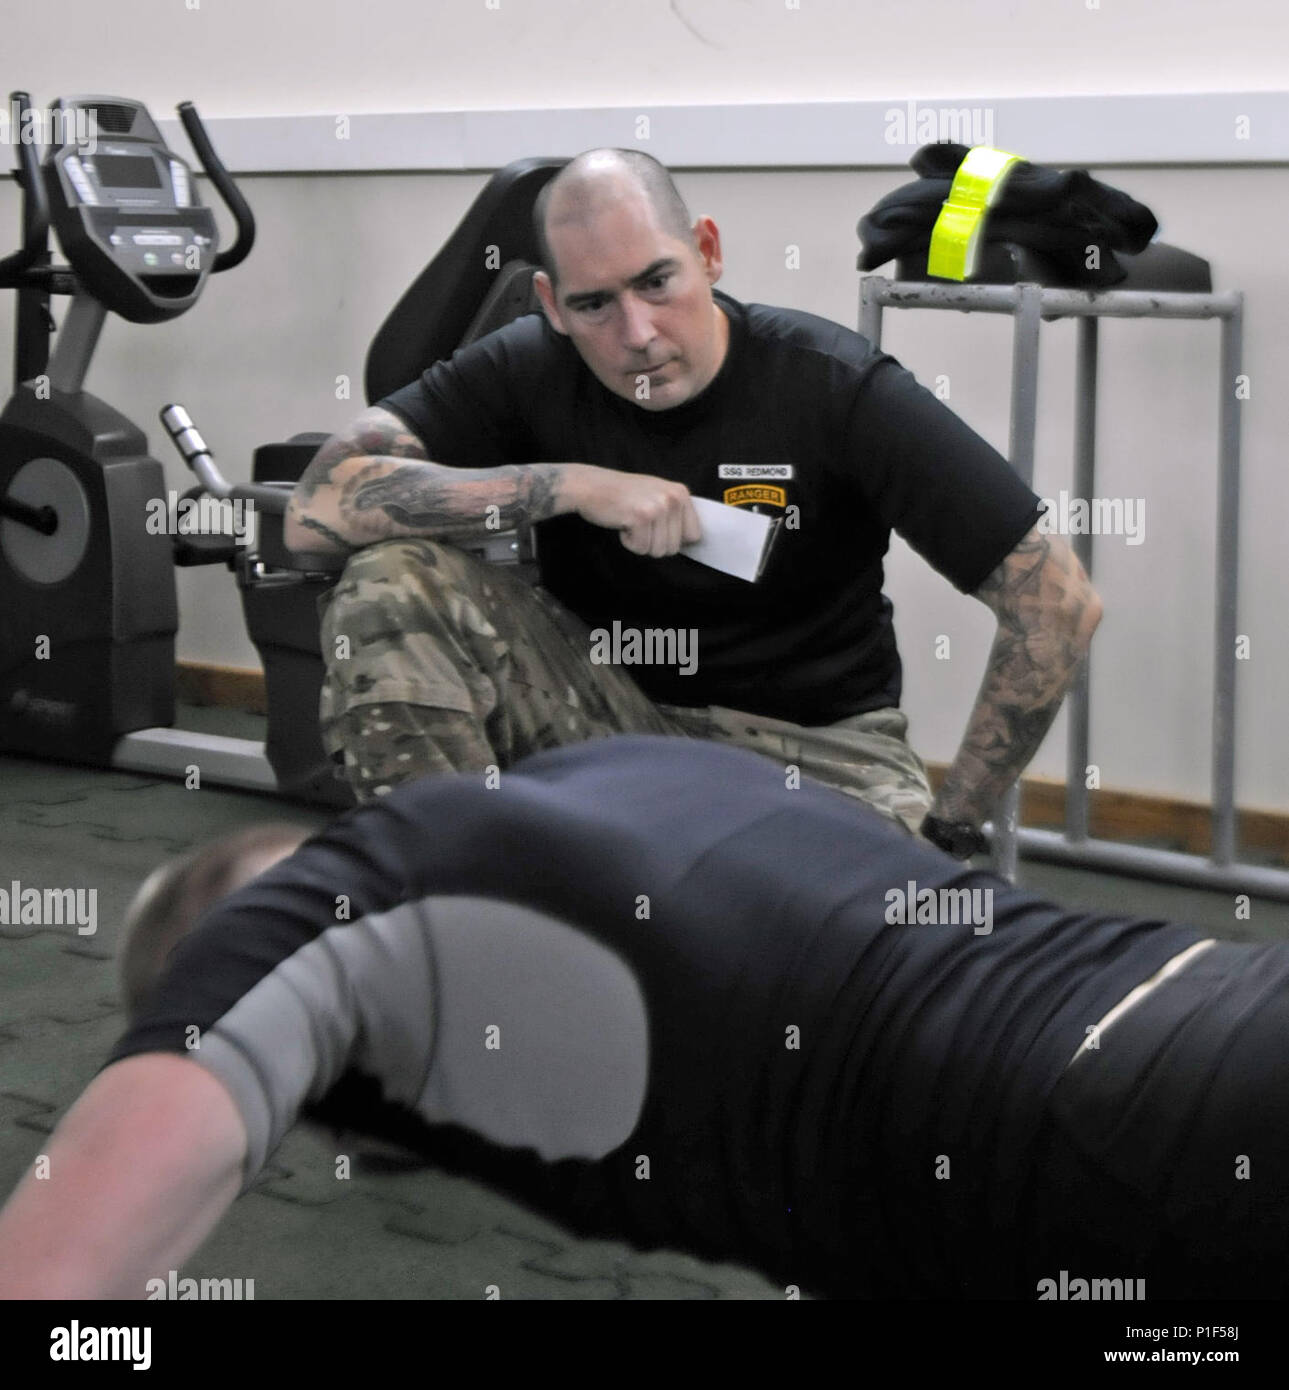 RUKLA, Lithuania – Staff Sgt. Ian Redmond, a Reconnaissance and Surveillance Leader’s Course instructor from Delta Company 3rd Squadron, 16th Cavalry Regiment, counts as Estonian Cpl. Algis Petrov does push-ups Oct. 26 during the Army Physical Fitness Test as part of the course. The course is being hosted by 2nd Battalion, 503rd Infantry Regiment, 173rd Airborne Brigade in Lithuania and features Paratroopers from their unit, as well as soldiers from Estonia, Latvia, Lithuania, Poland and Slovakia. Stock Photo